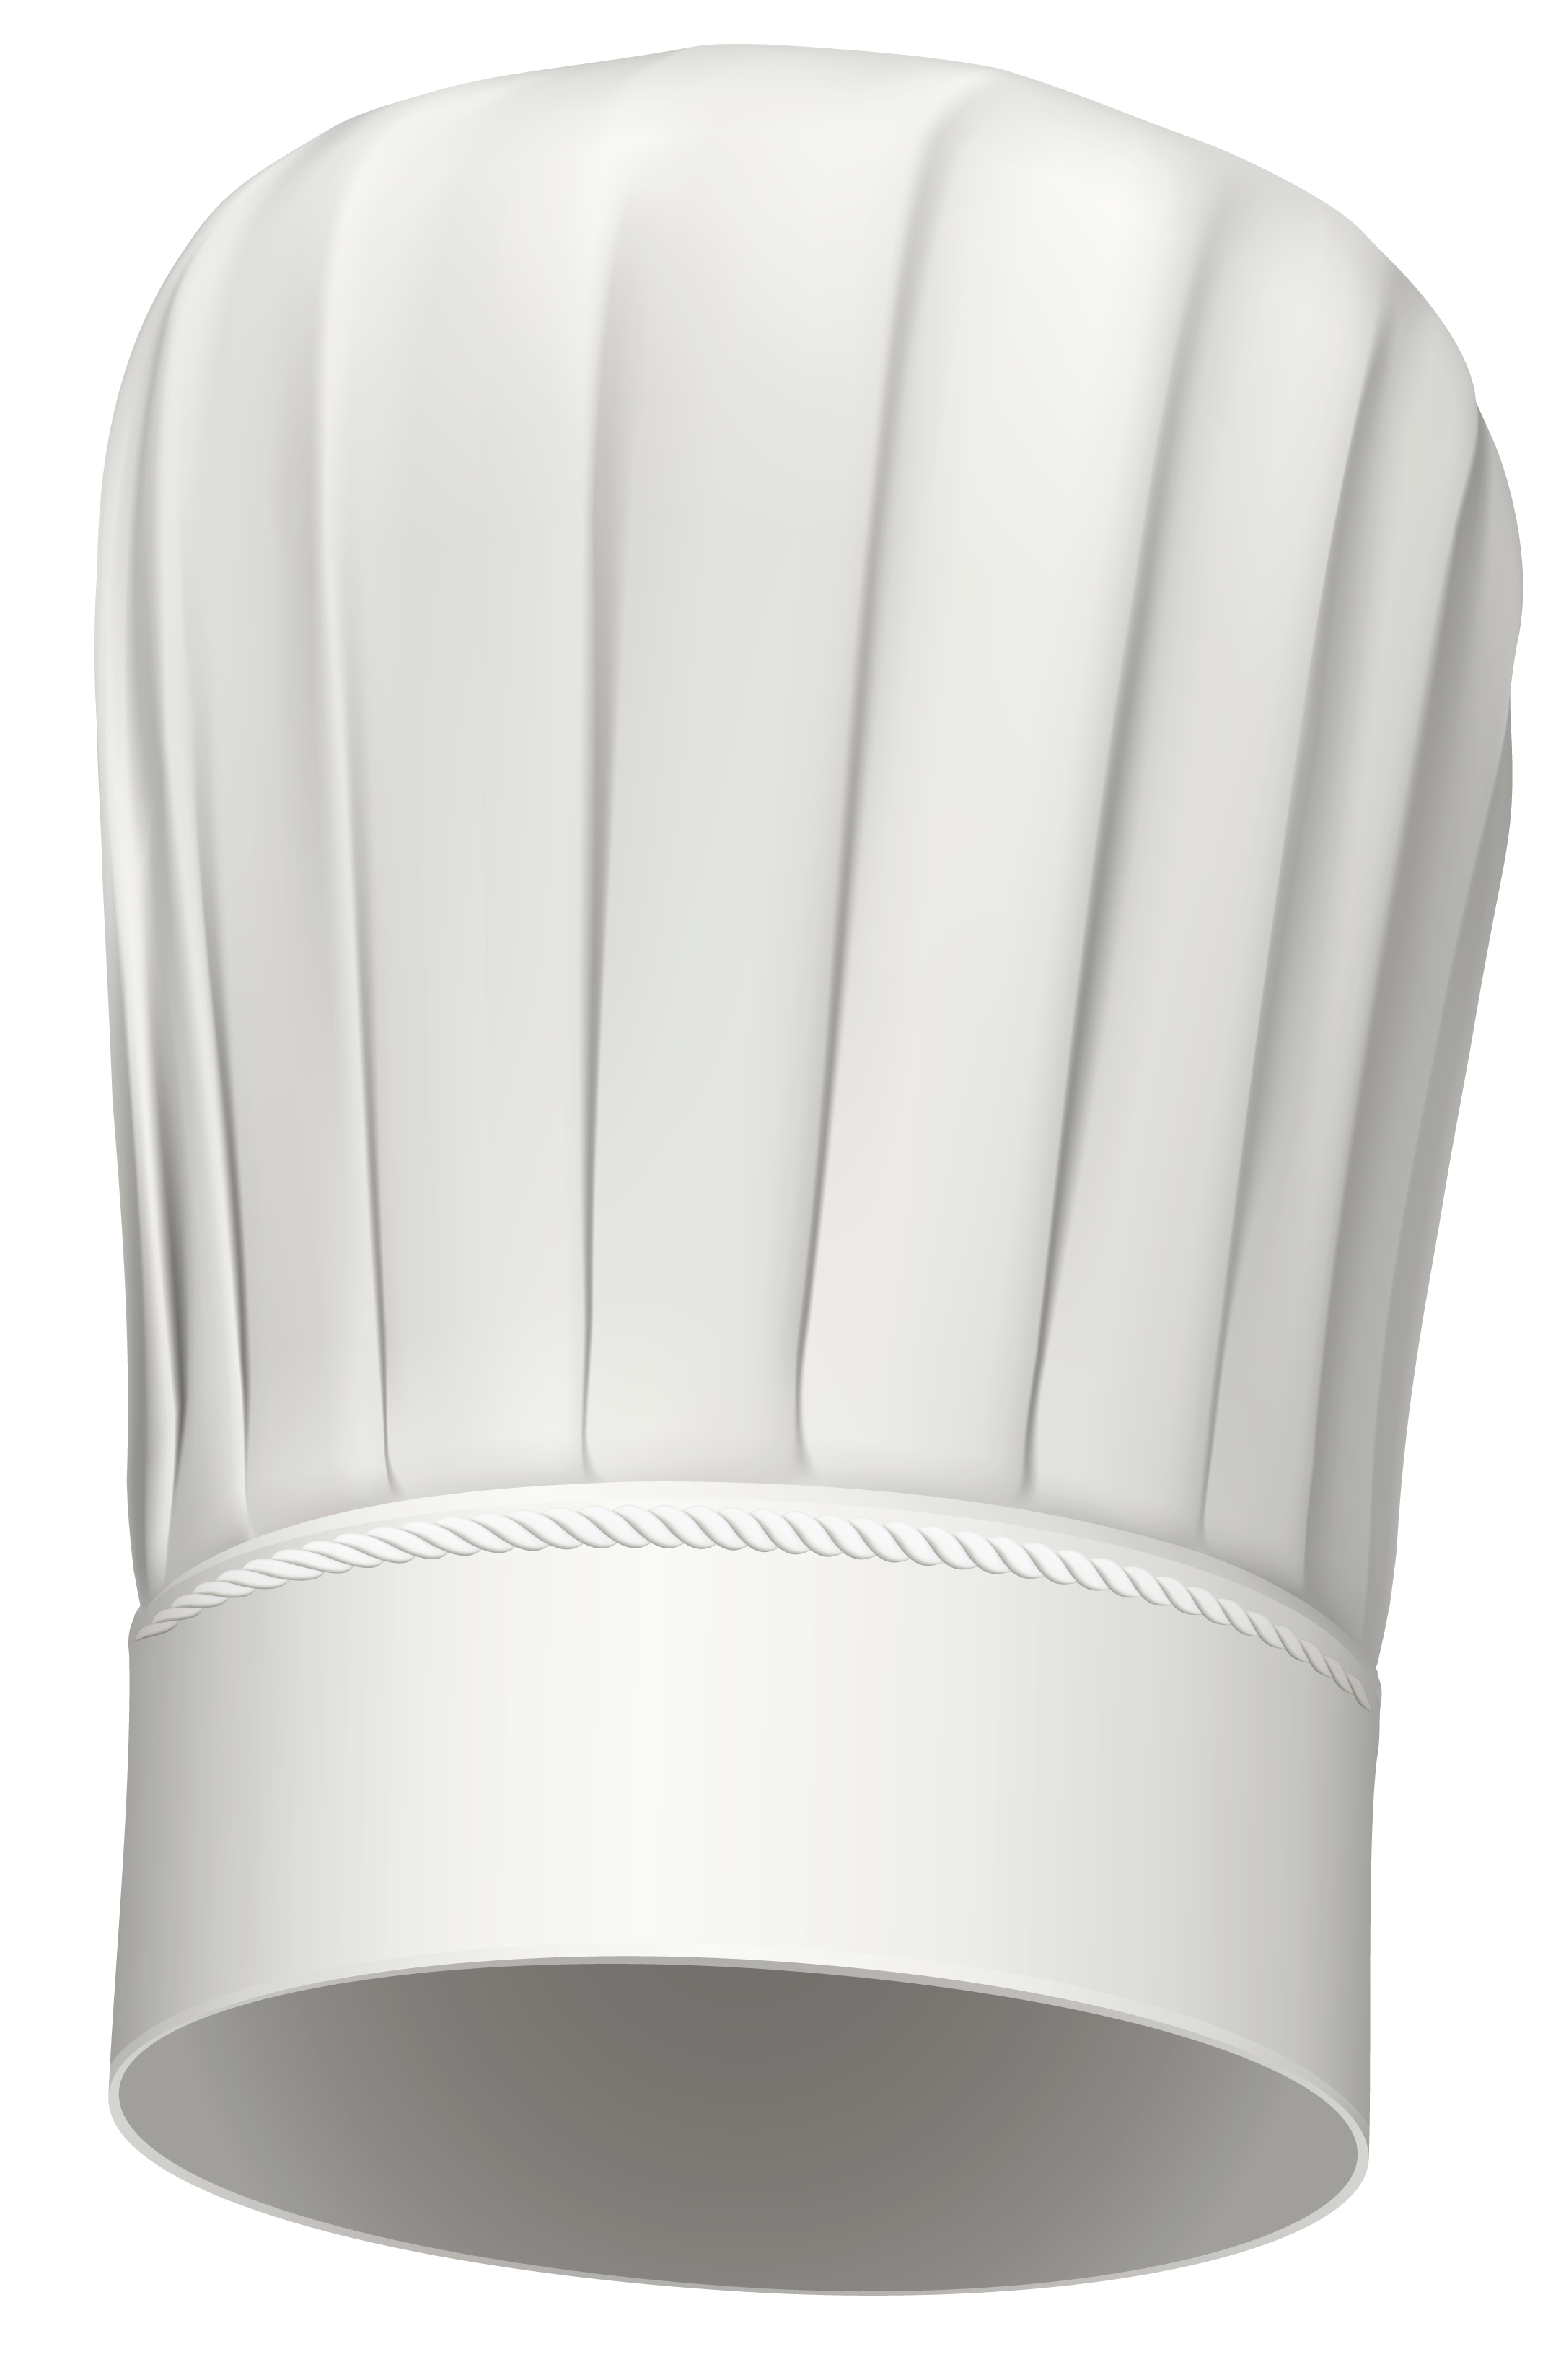 chef hat clipart vector - photo #46